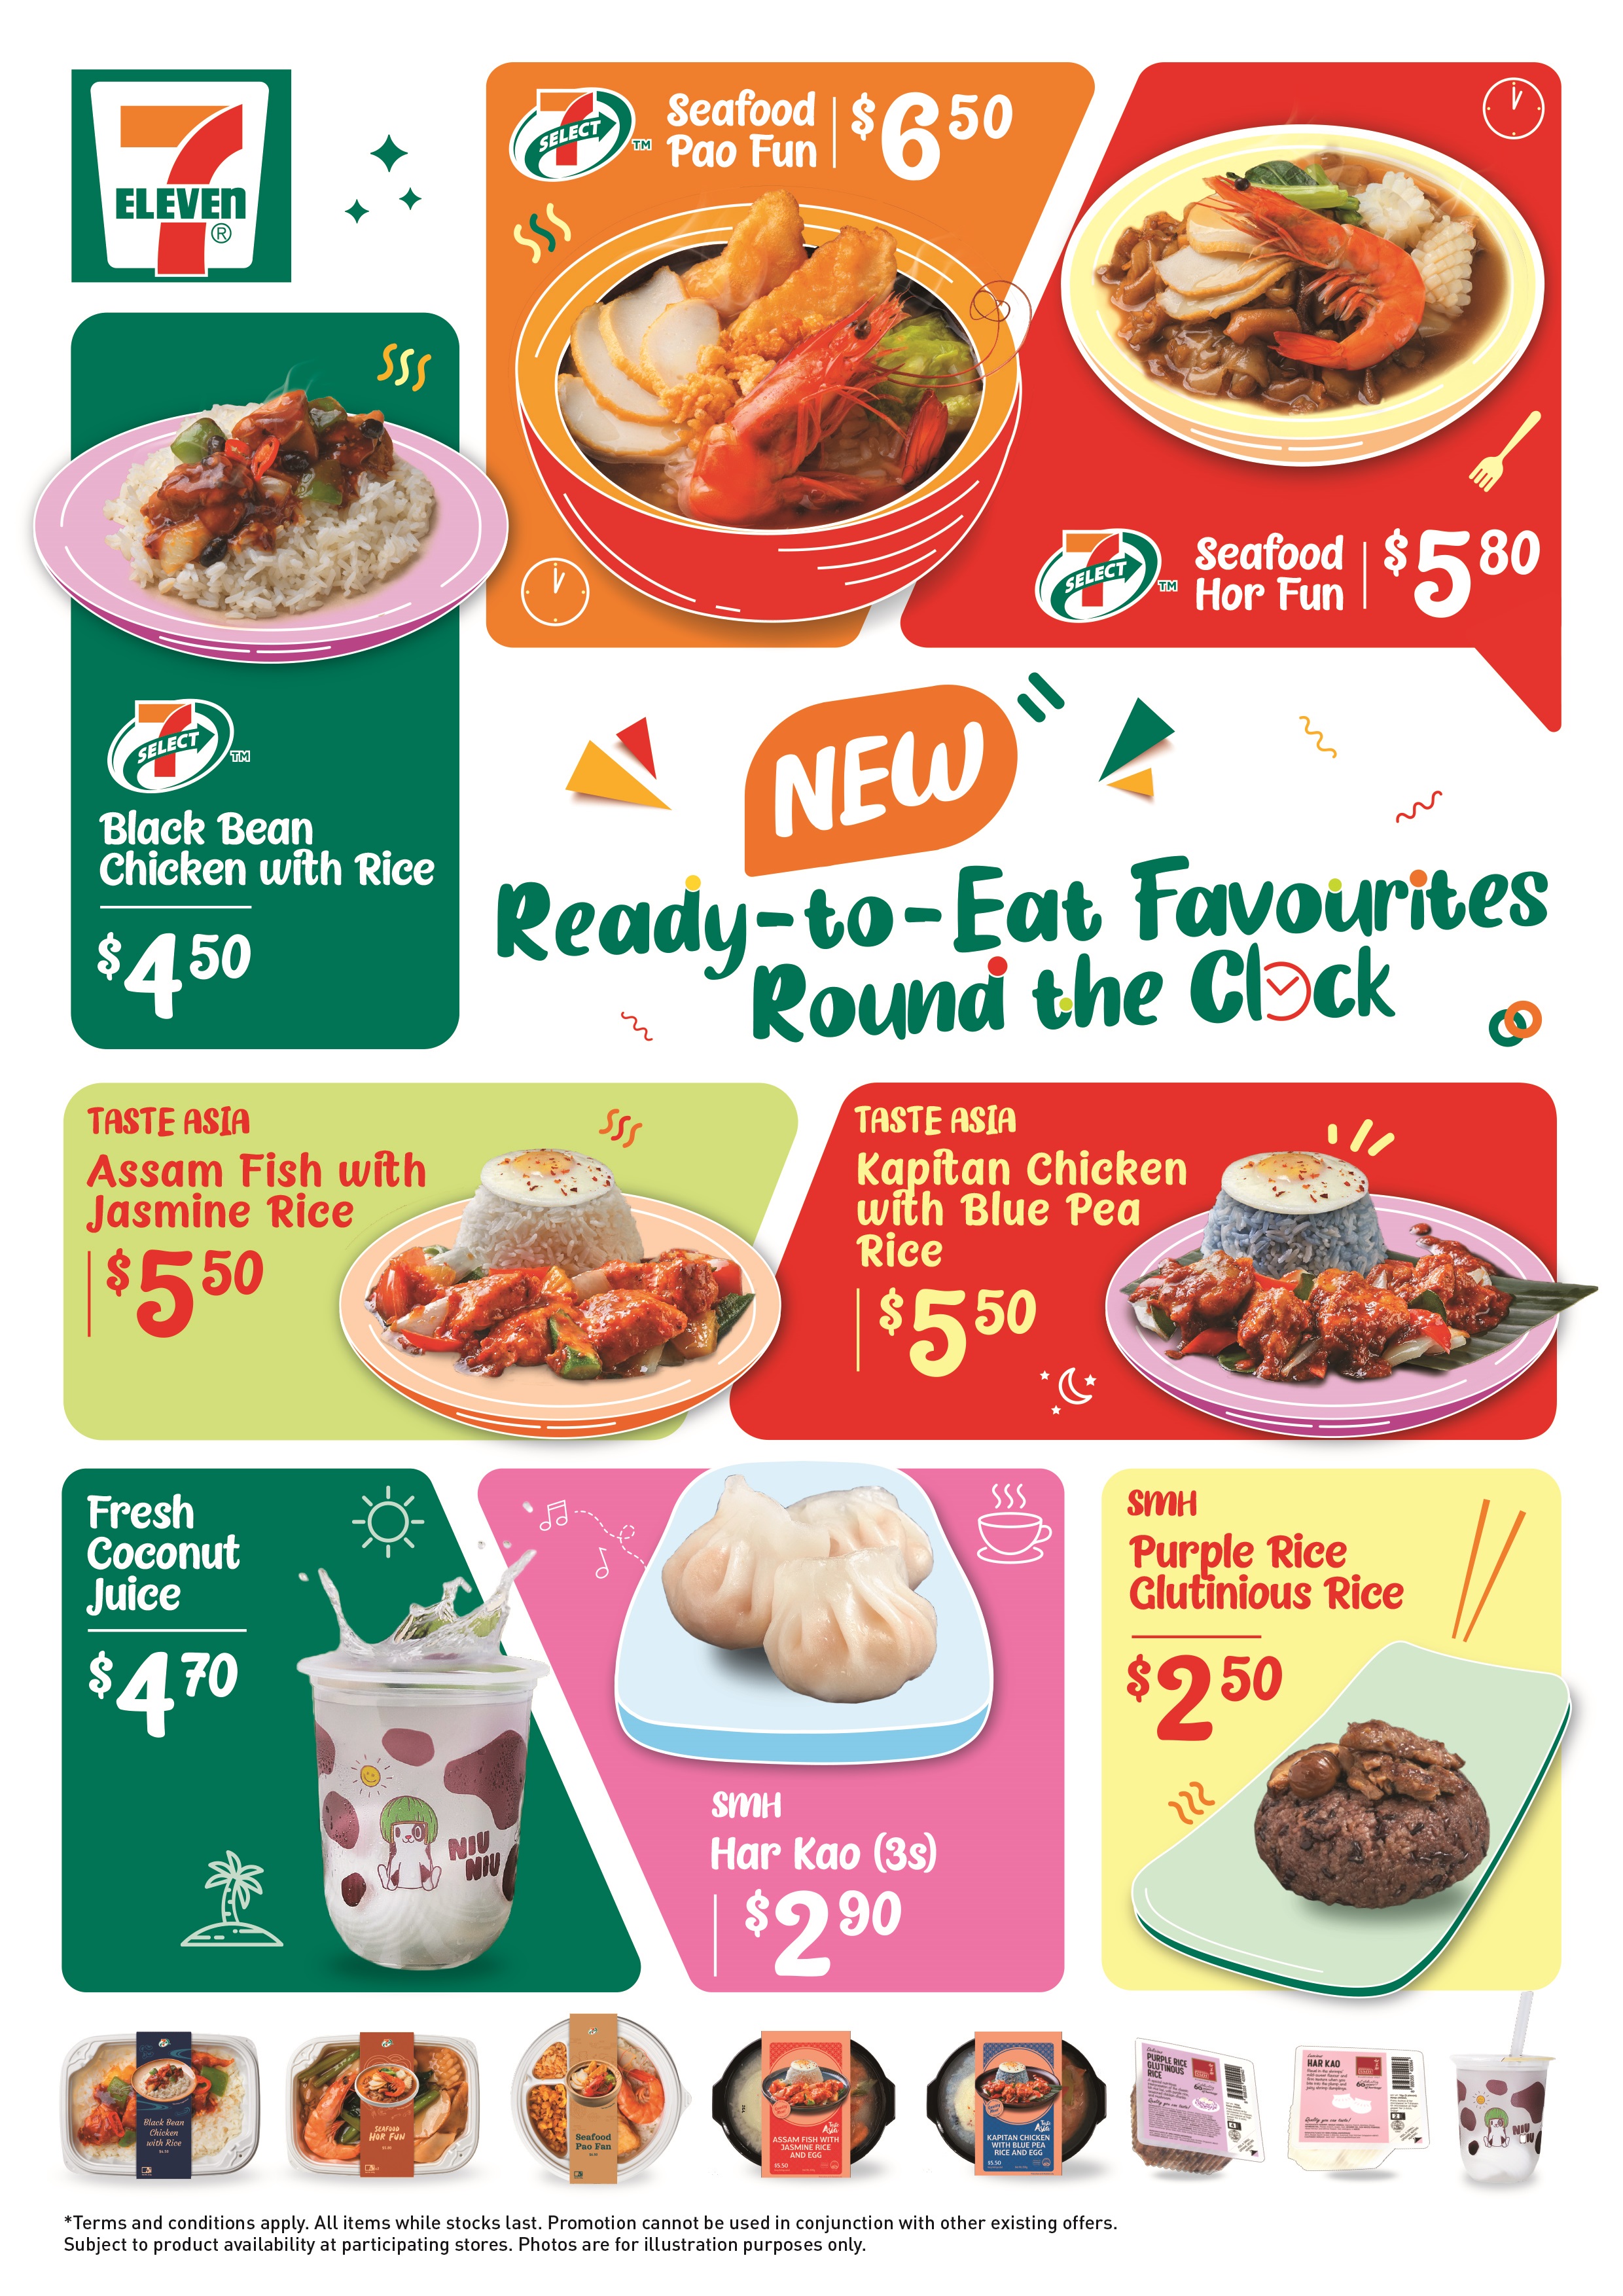 recharge with 7 elevens new comfort food menu of ready to eat local delights